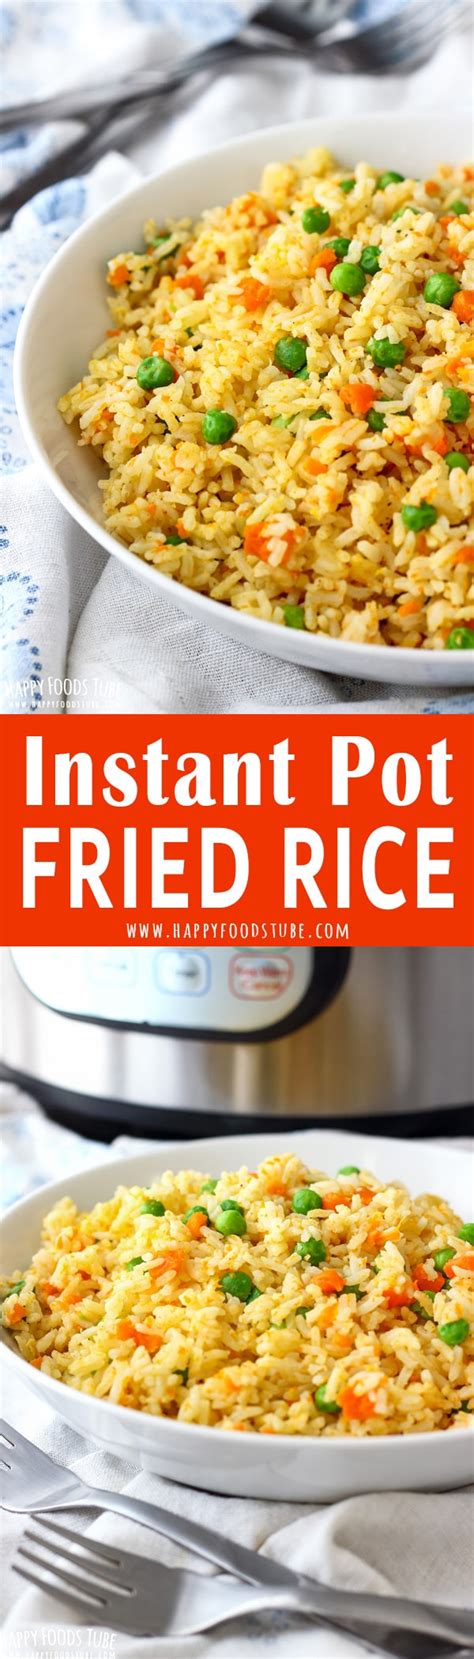 This instant pot fried rice is a hit in our family every time. Instant Pot Fried Rice - Pressure Cooker Fried Rice